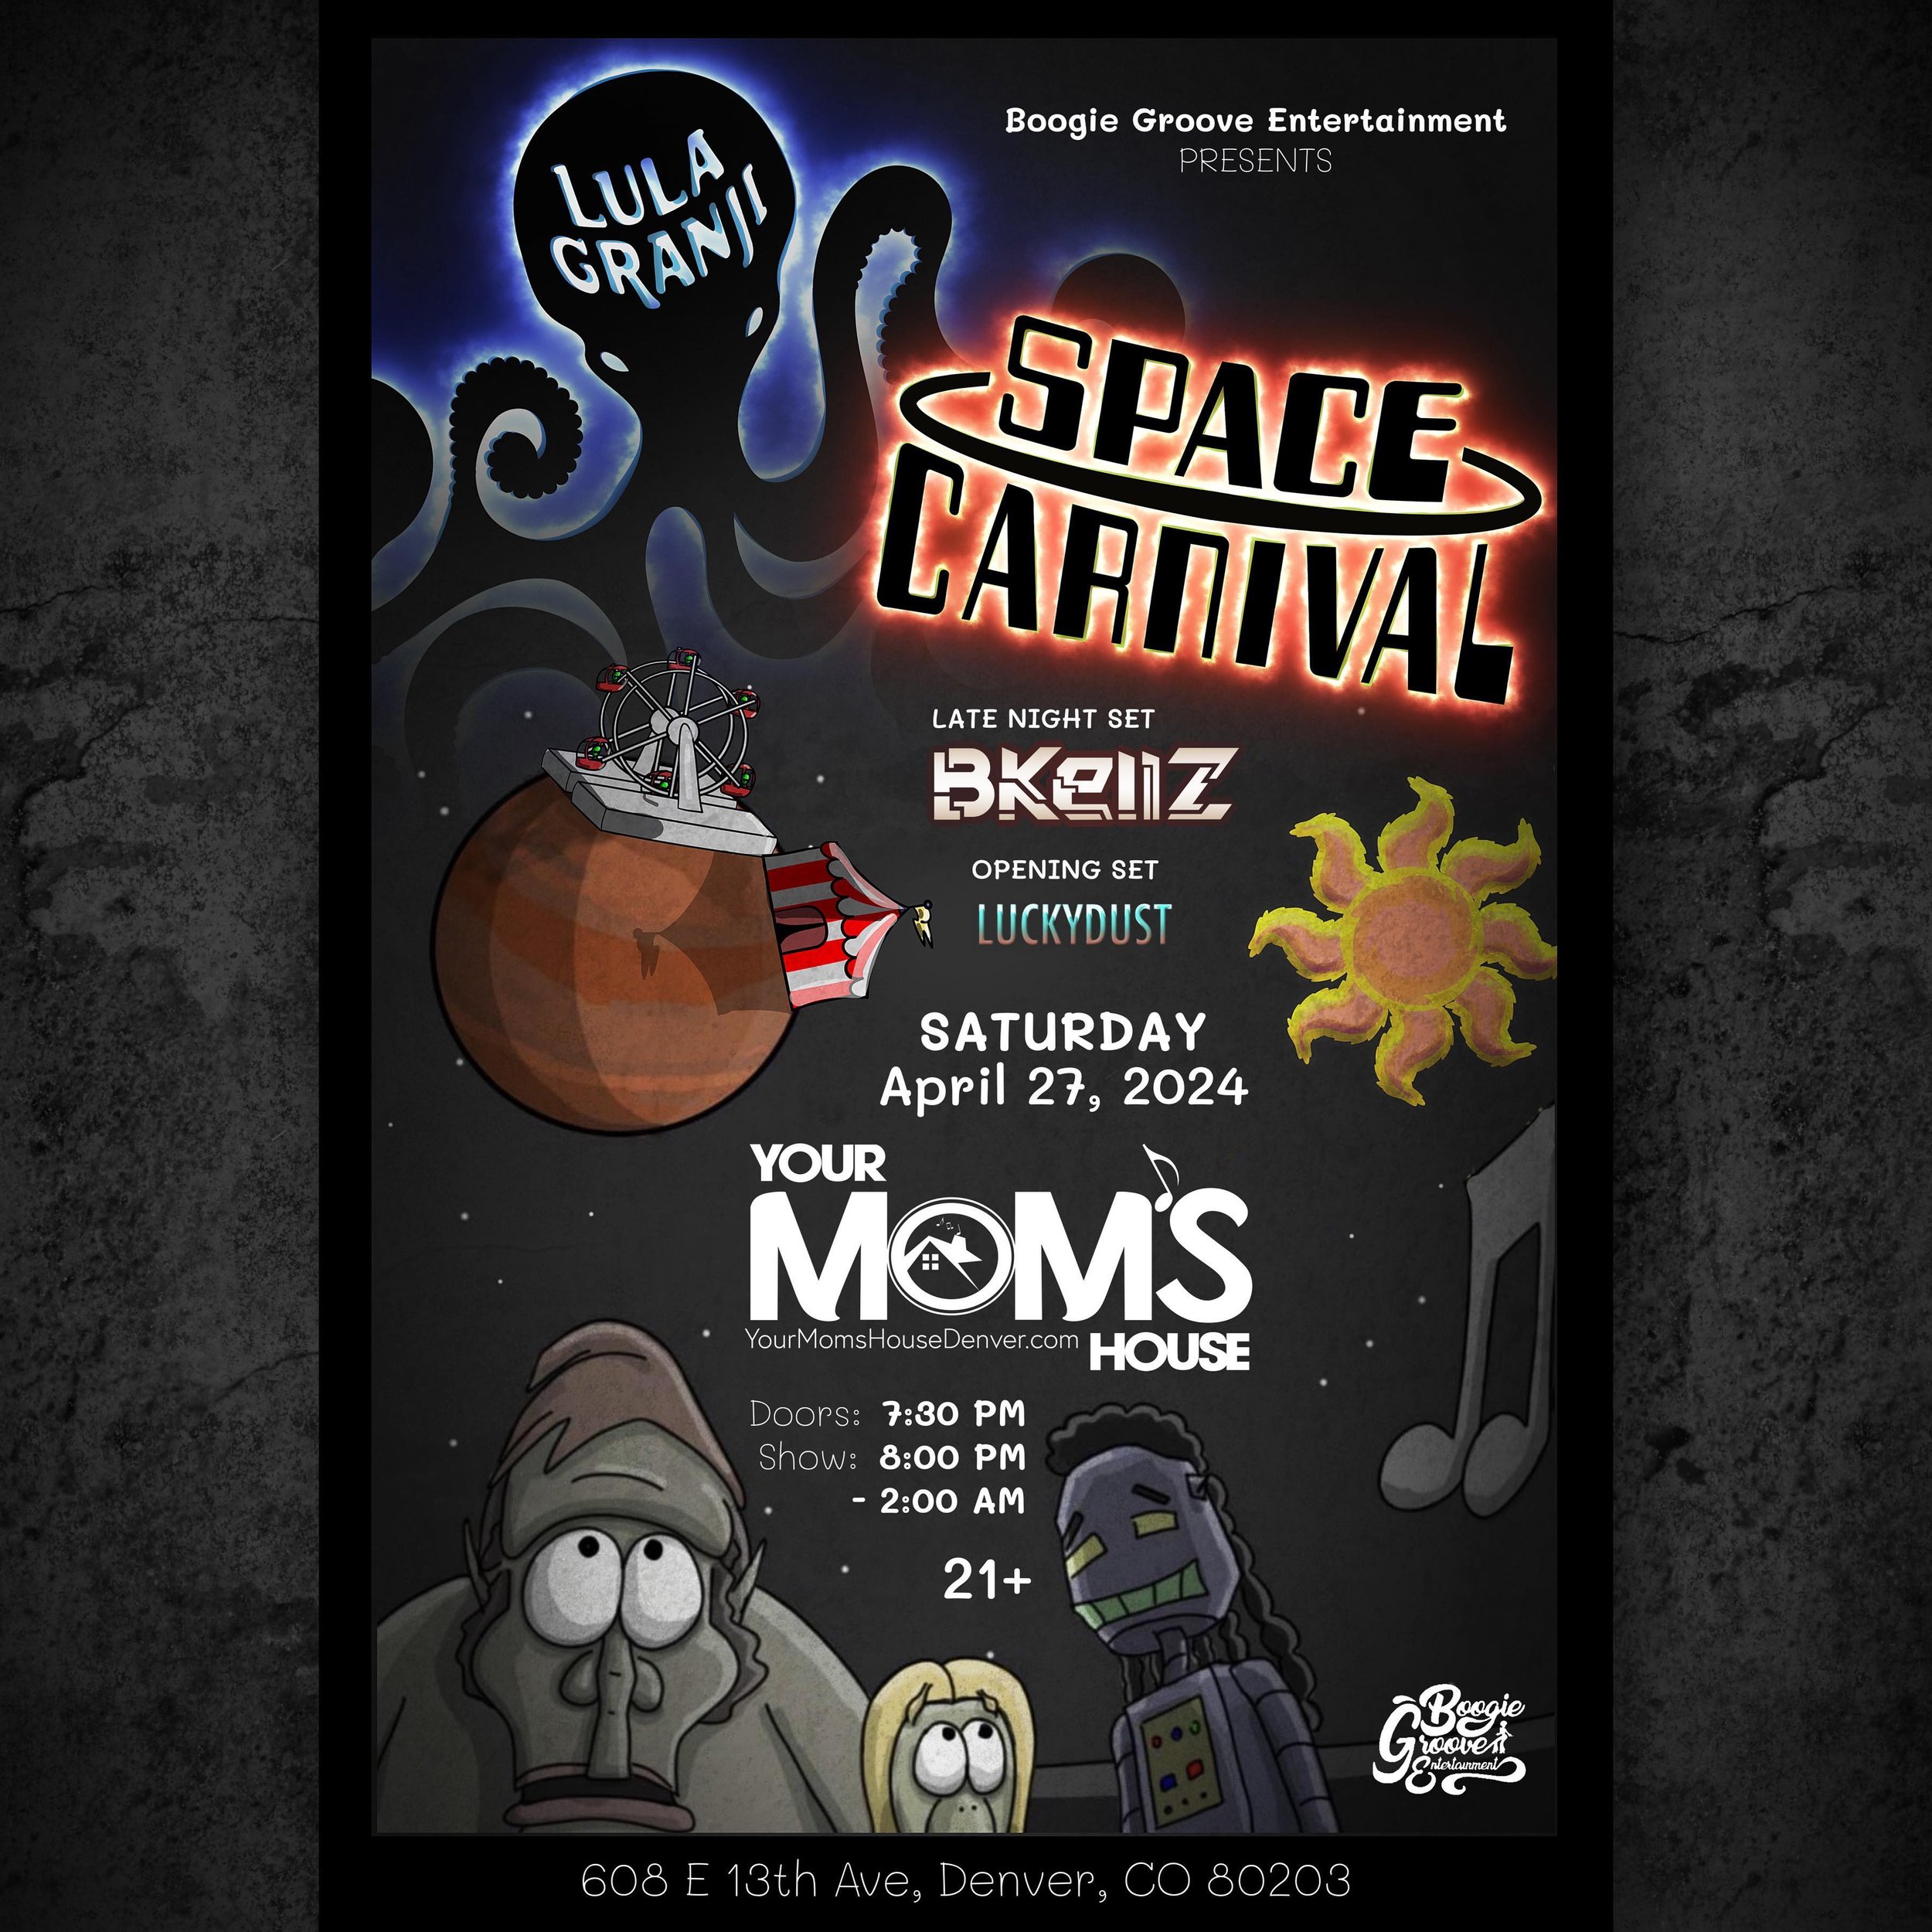 We are excited to announce our first show in some time! 

Come check us out alongside @space_carnival @bkellzmusic and @someluckydust at @yourmomshousedenver on Saturday April 27!

Tickets in our Linktree in bio!